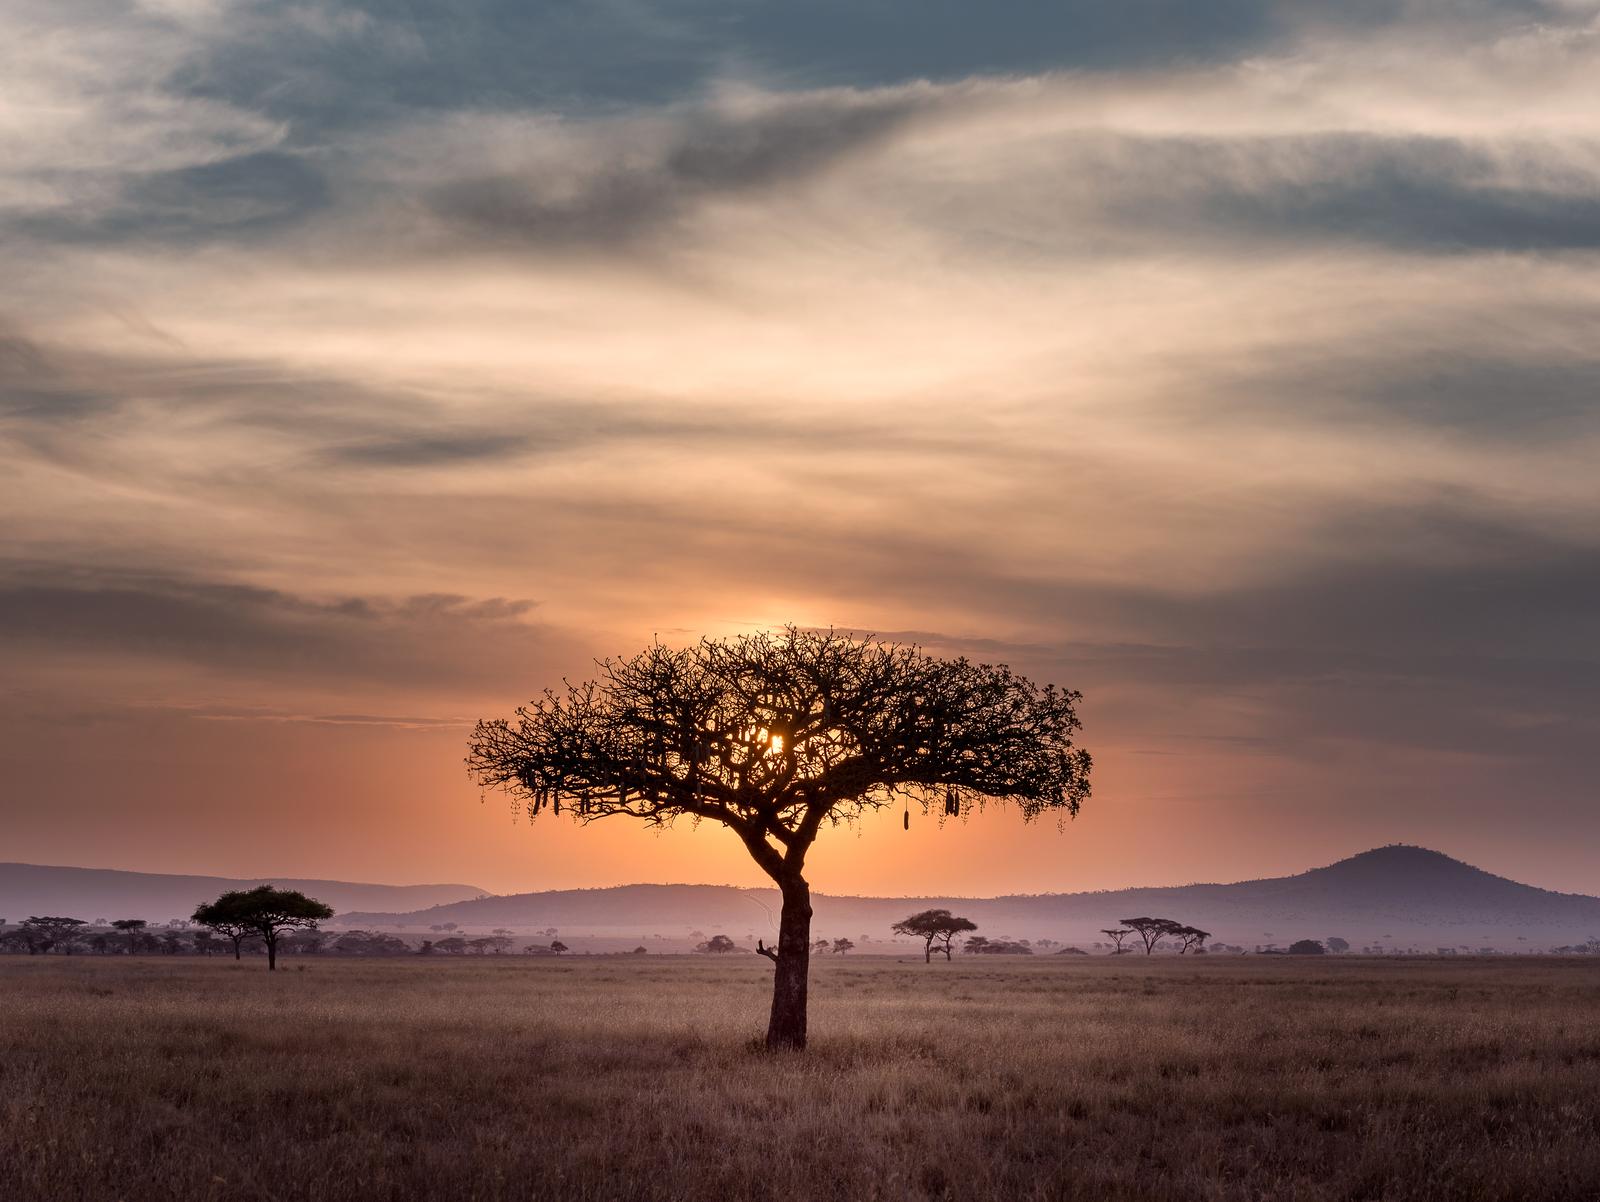 Are You a World Traveler? Test Your Knowledge by Matching These Majestic Natural Sites to Their Countries! Sunset at Serengeti National Park, Tanzania